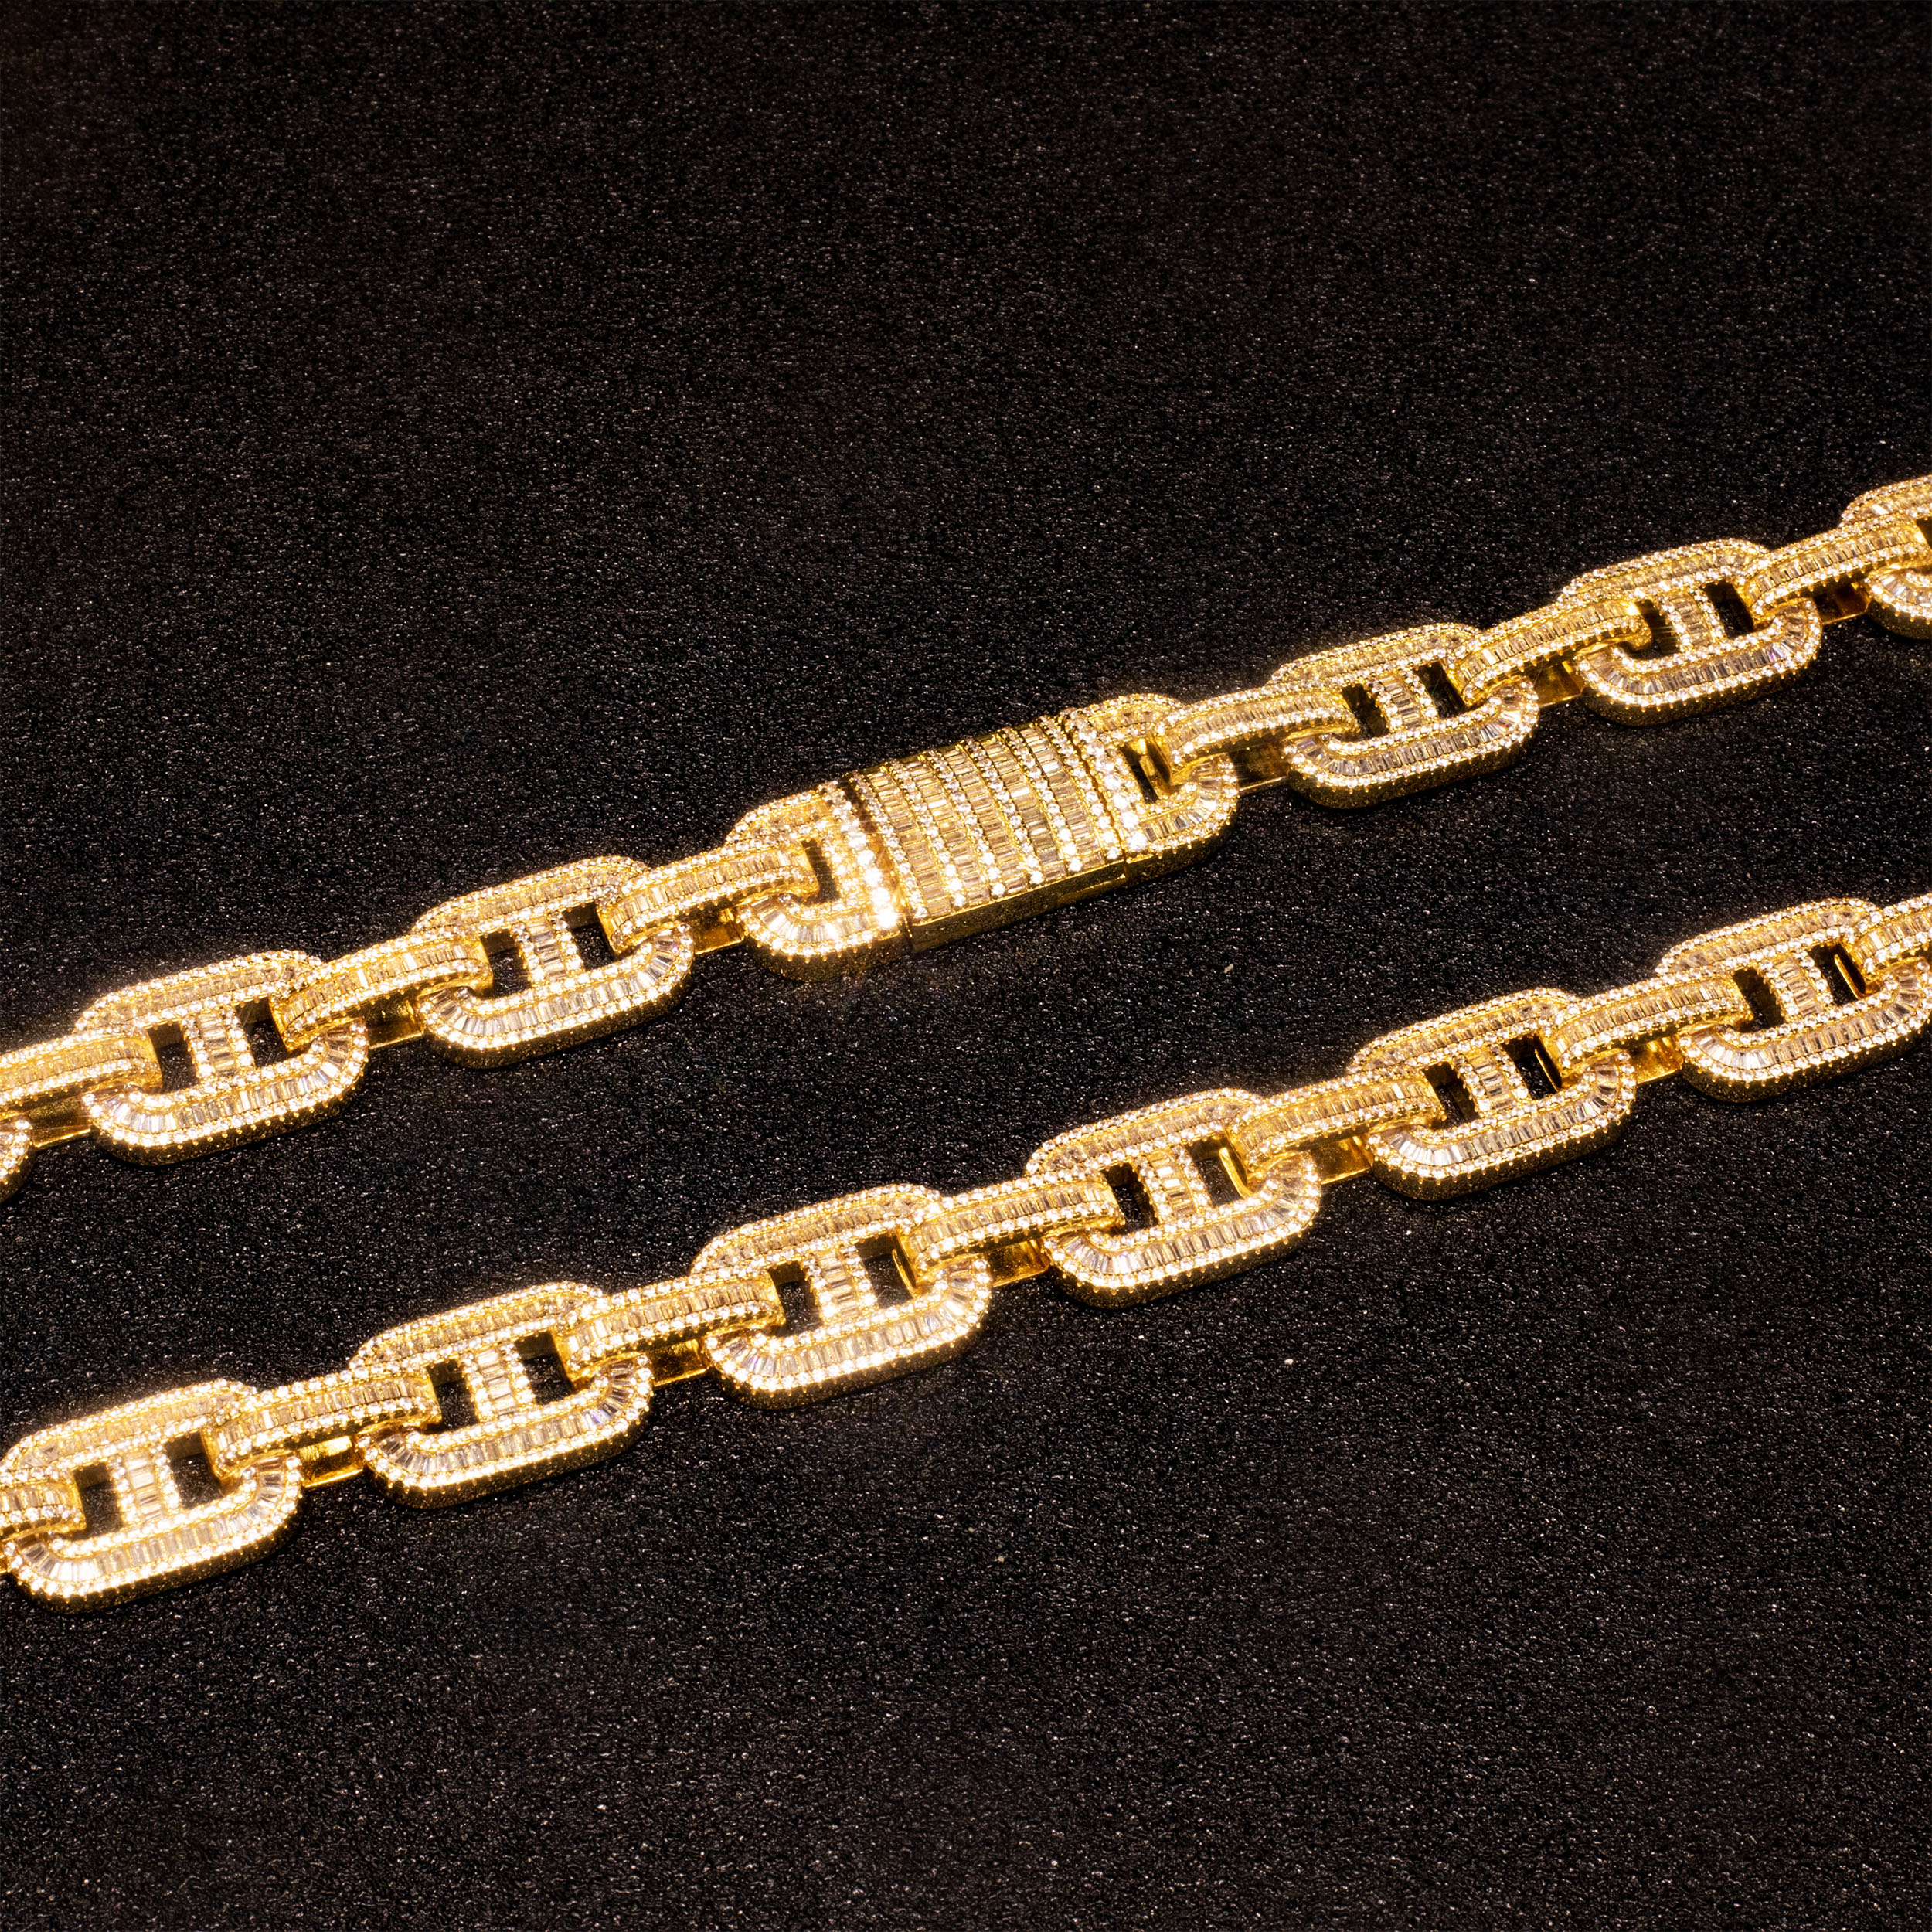 20-24" 15mm Iced Out H-Shape Cuban Link Chain Sulludd